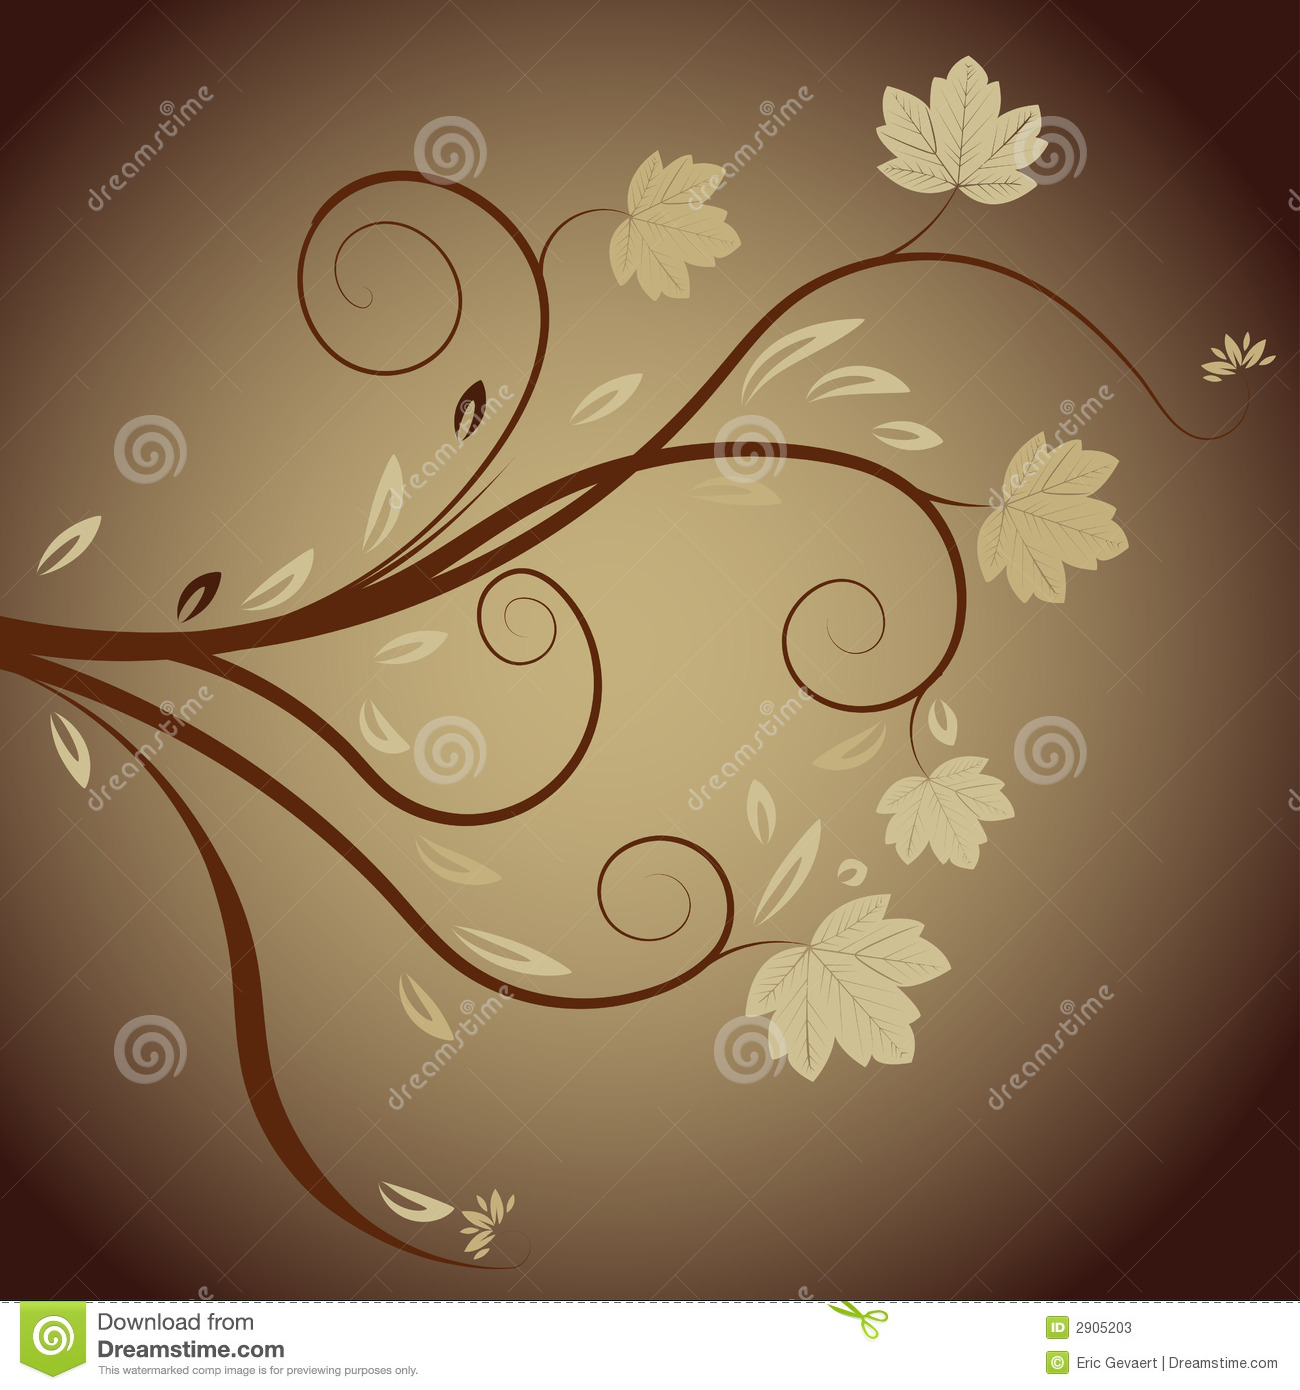 Abstract Vector Floral Design